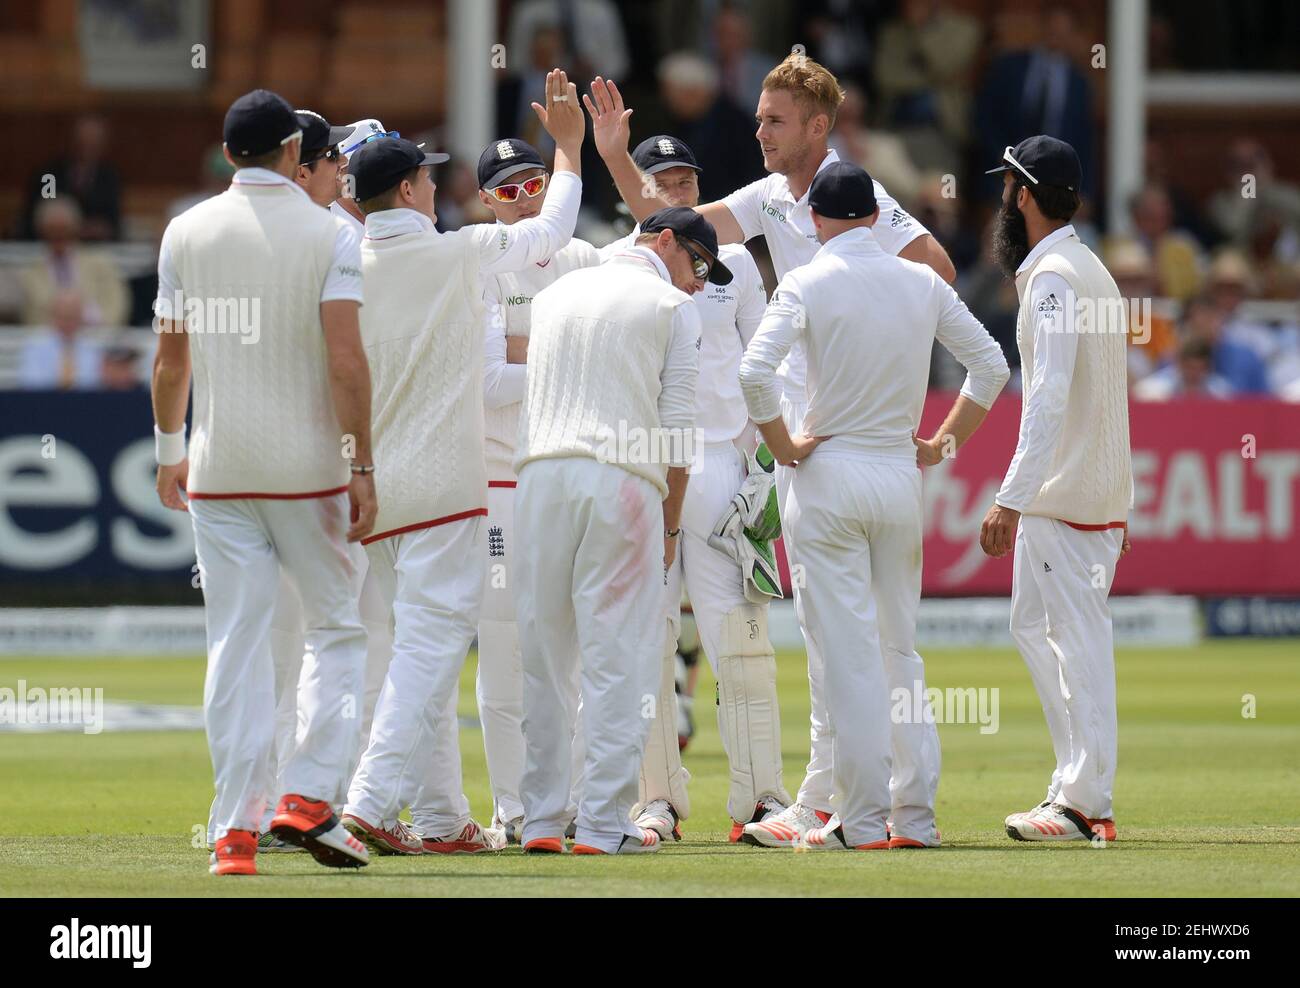 Cricket - England v Australia - Investec Ashes Test Series Second Test - Lord?s - 17/7/15 England's Stuart Broad celebrates with team mates after dismissing Australia's Mitchell Marsh Reuters / Philip Brown Livepic Stock Photo